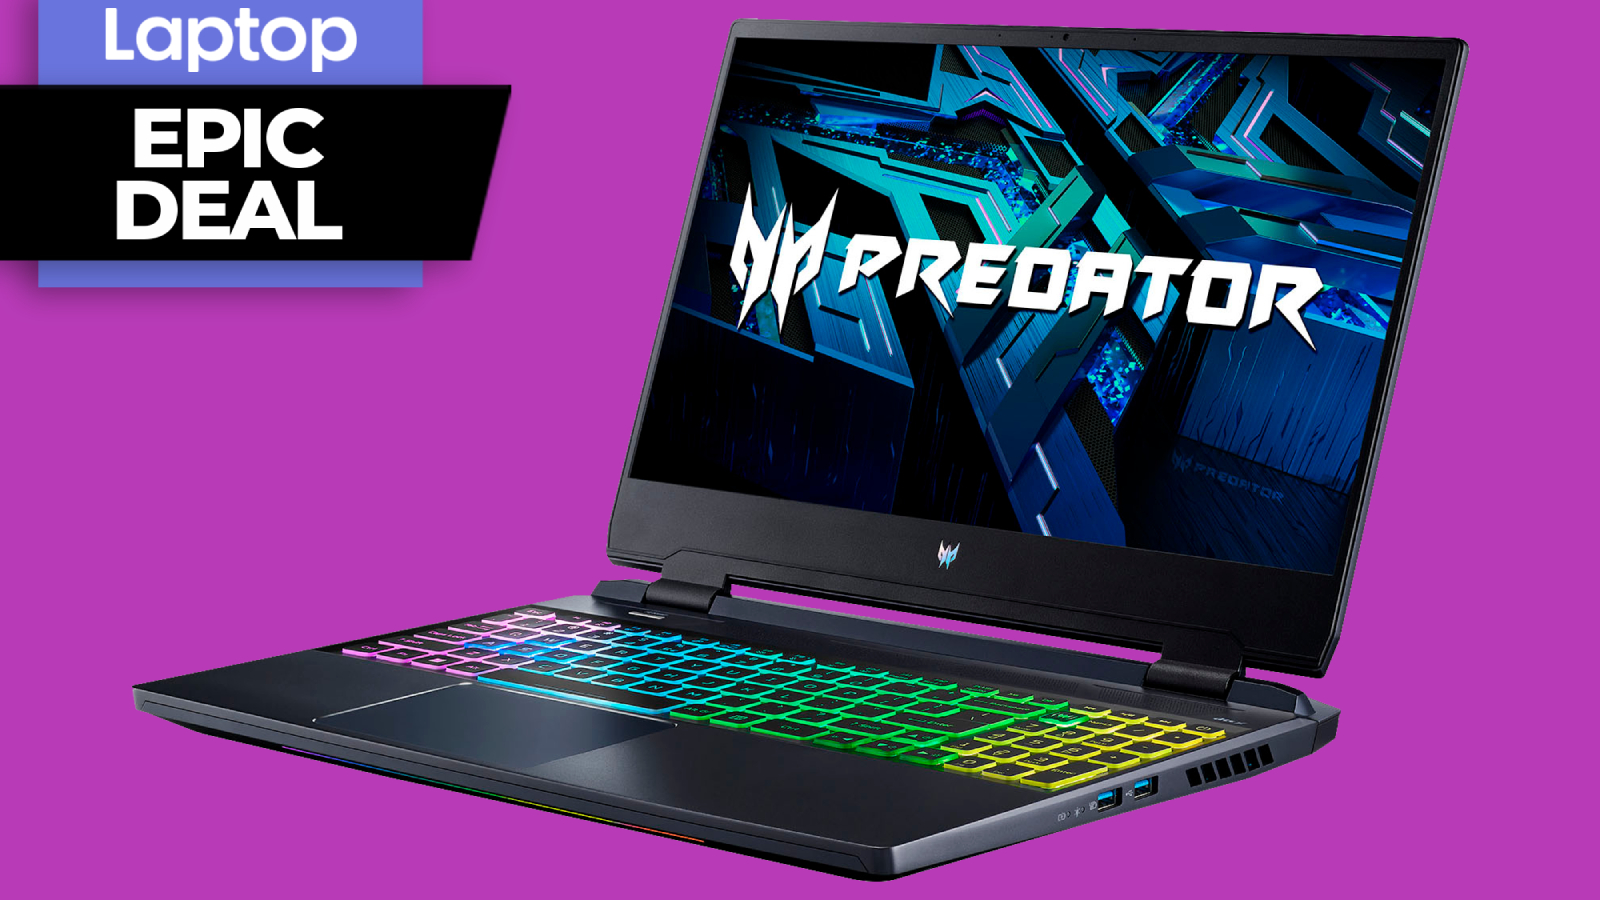 Enjoy this epic deal and save $500 on this Acer Predator Helios gaming laptop